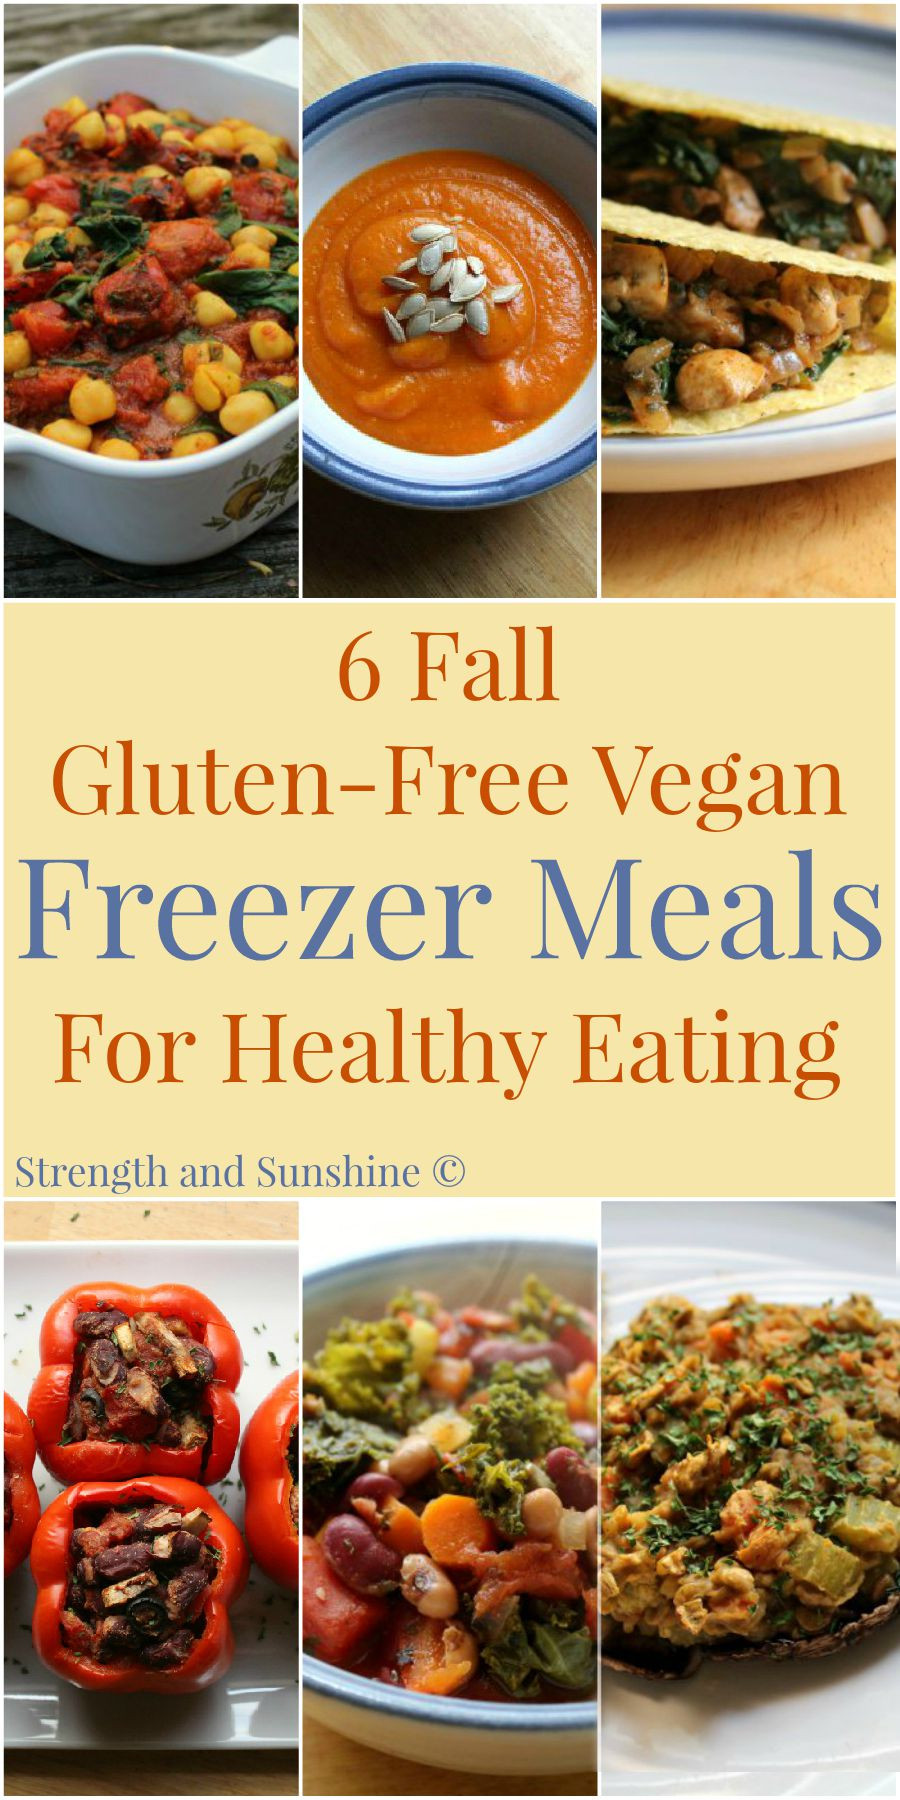 Gluten Free Entree Recipes
 6 Fall Gluten Free Vegan Freezer Meals For Healthy Eating